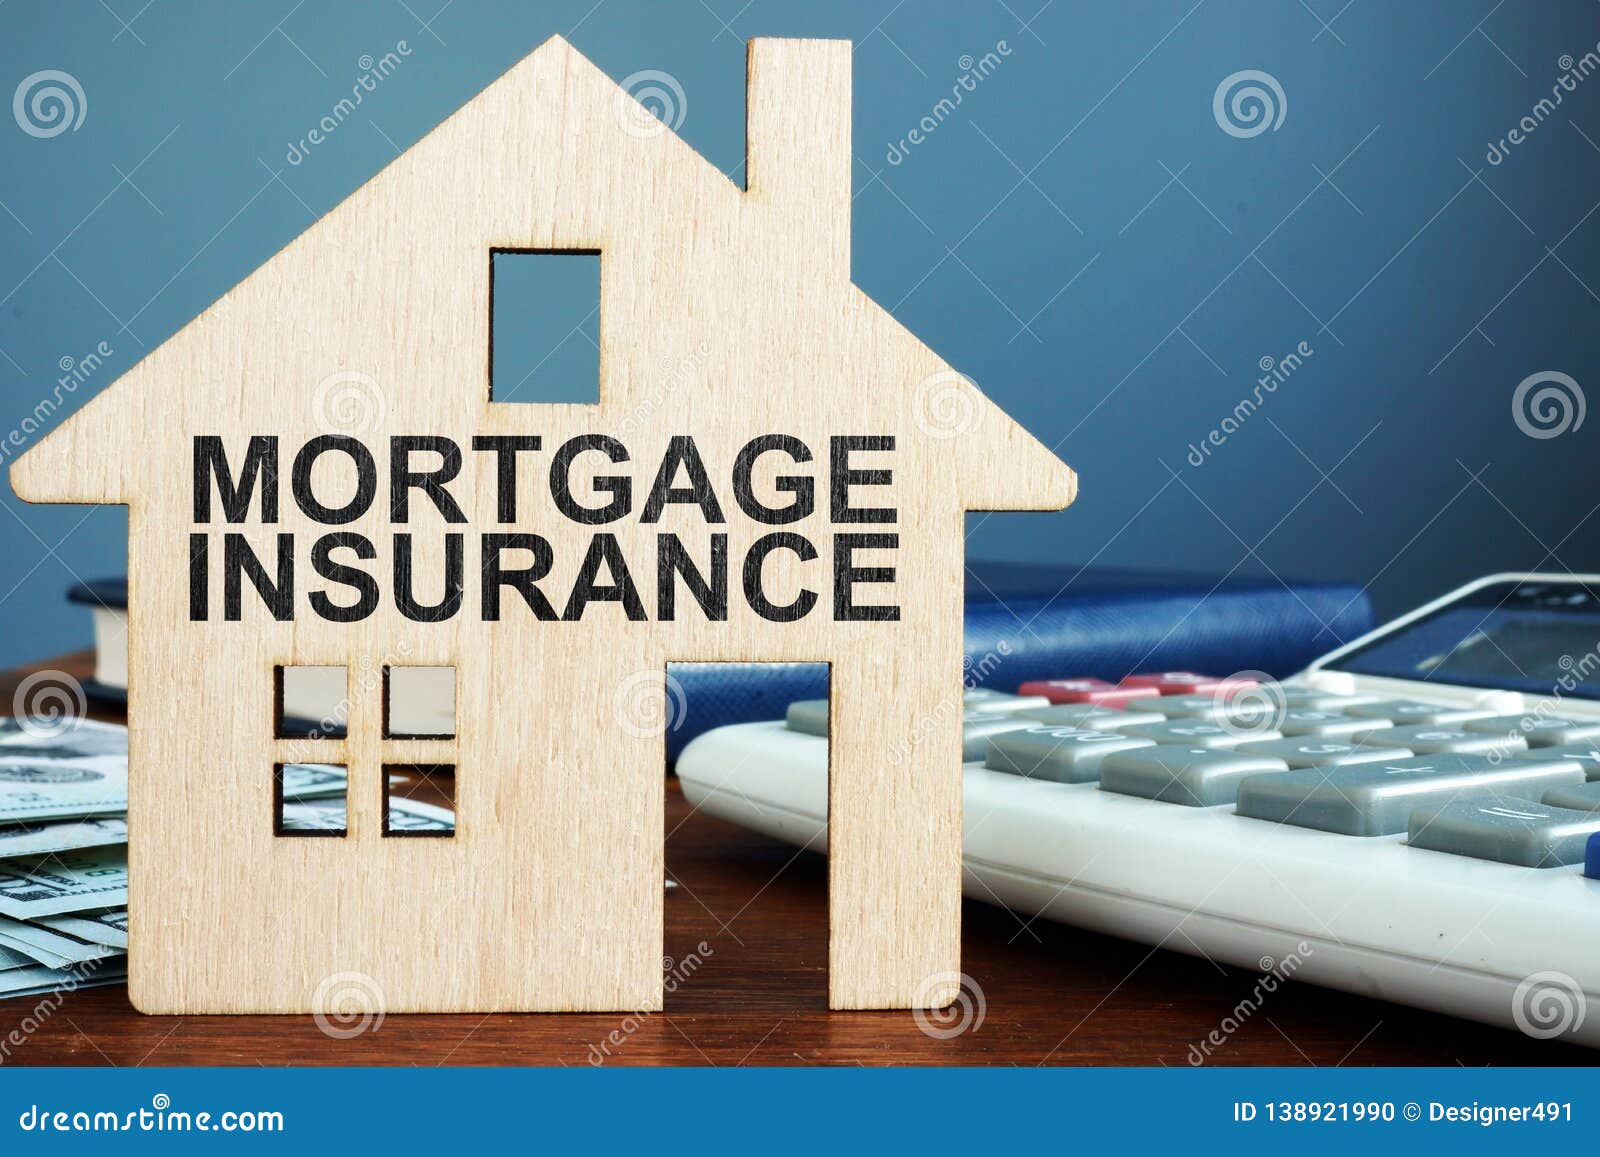 Mortgage Insurance. Wooden Home, Money And Calculator